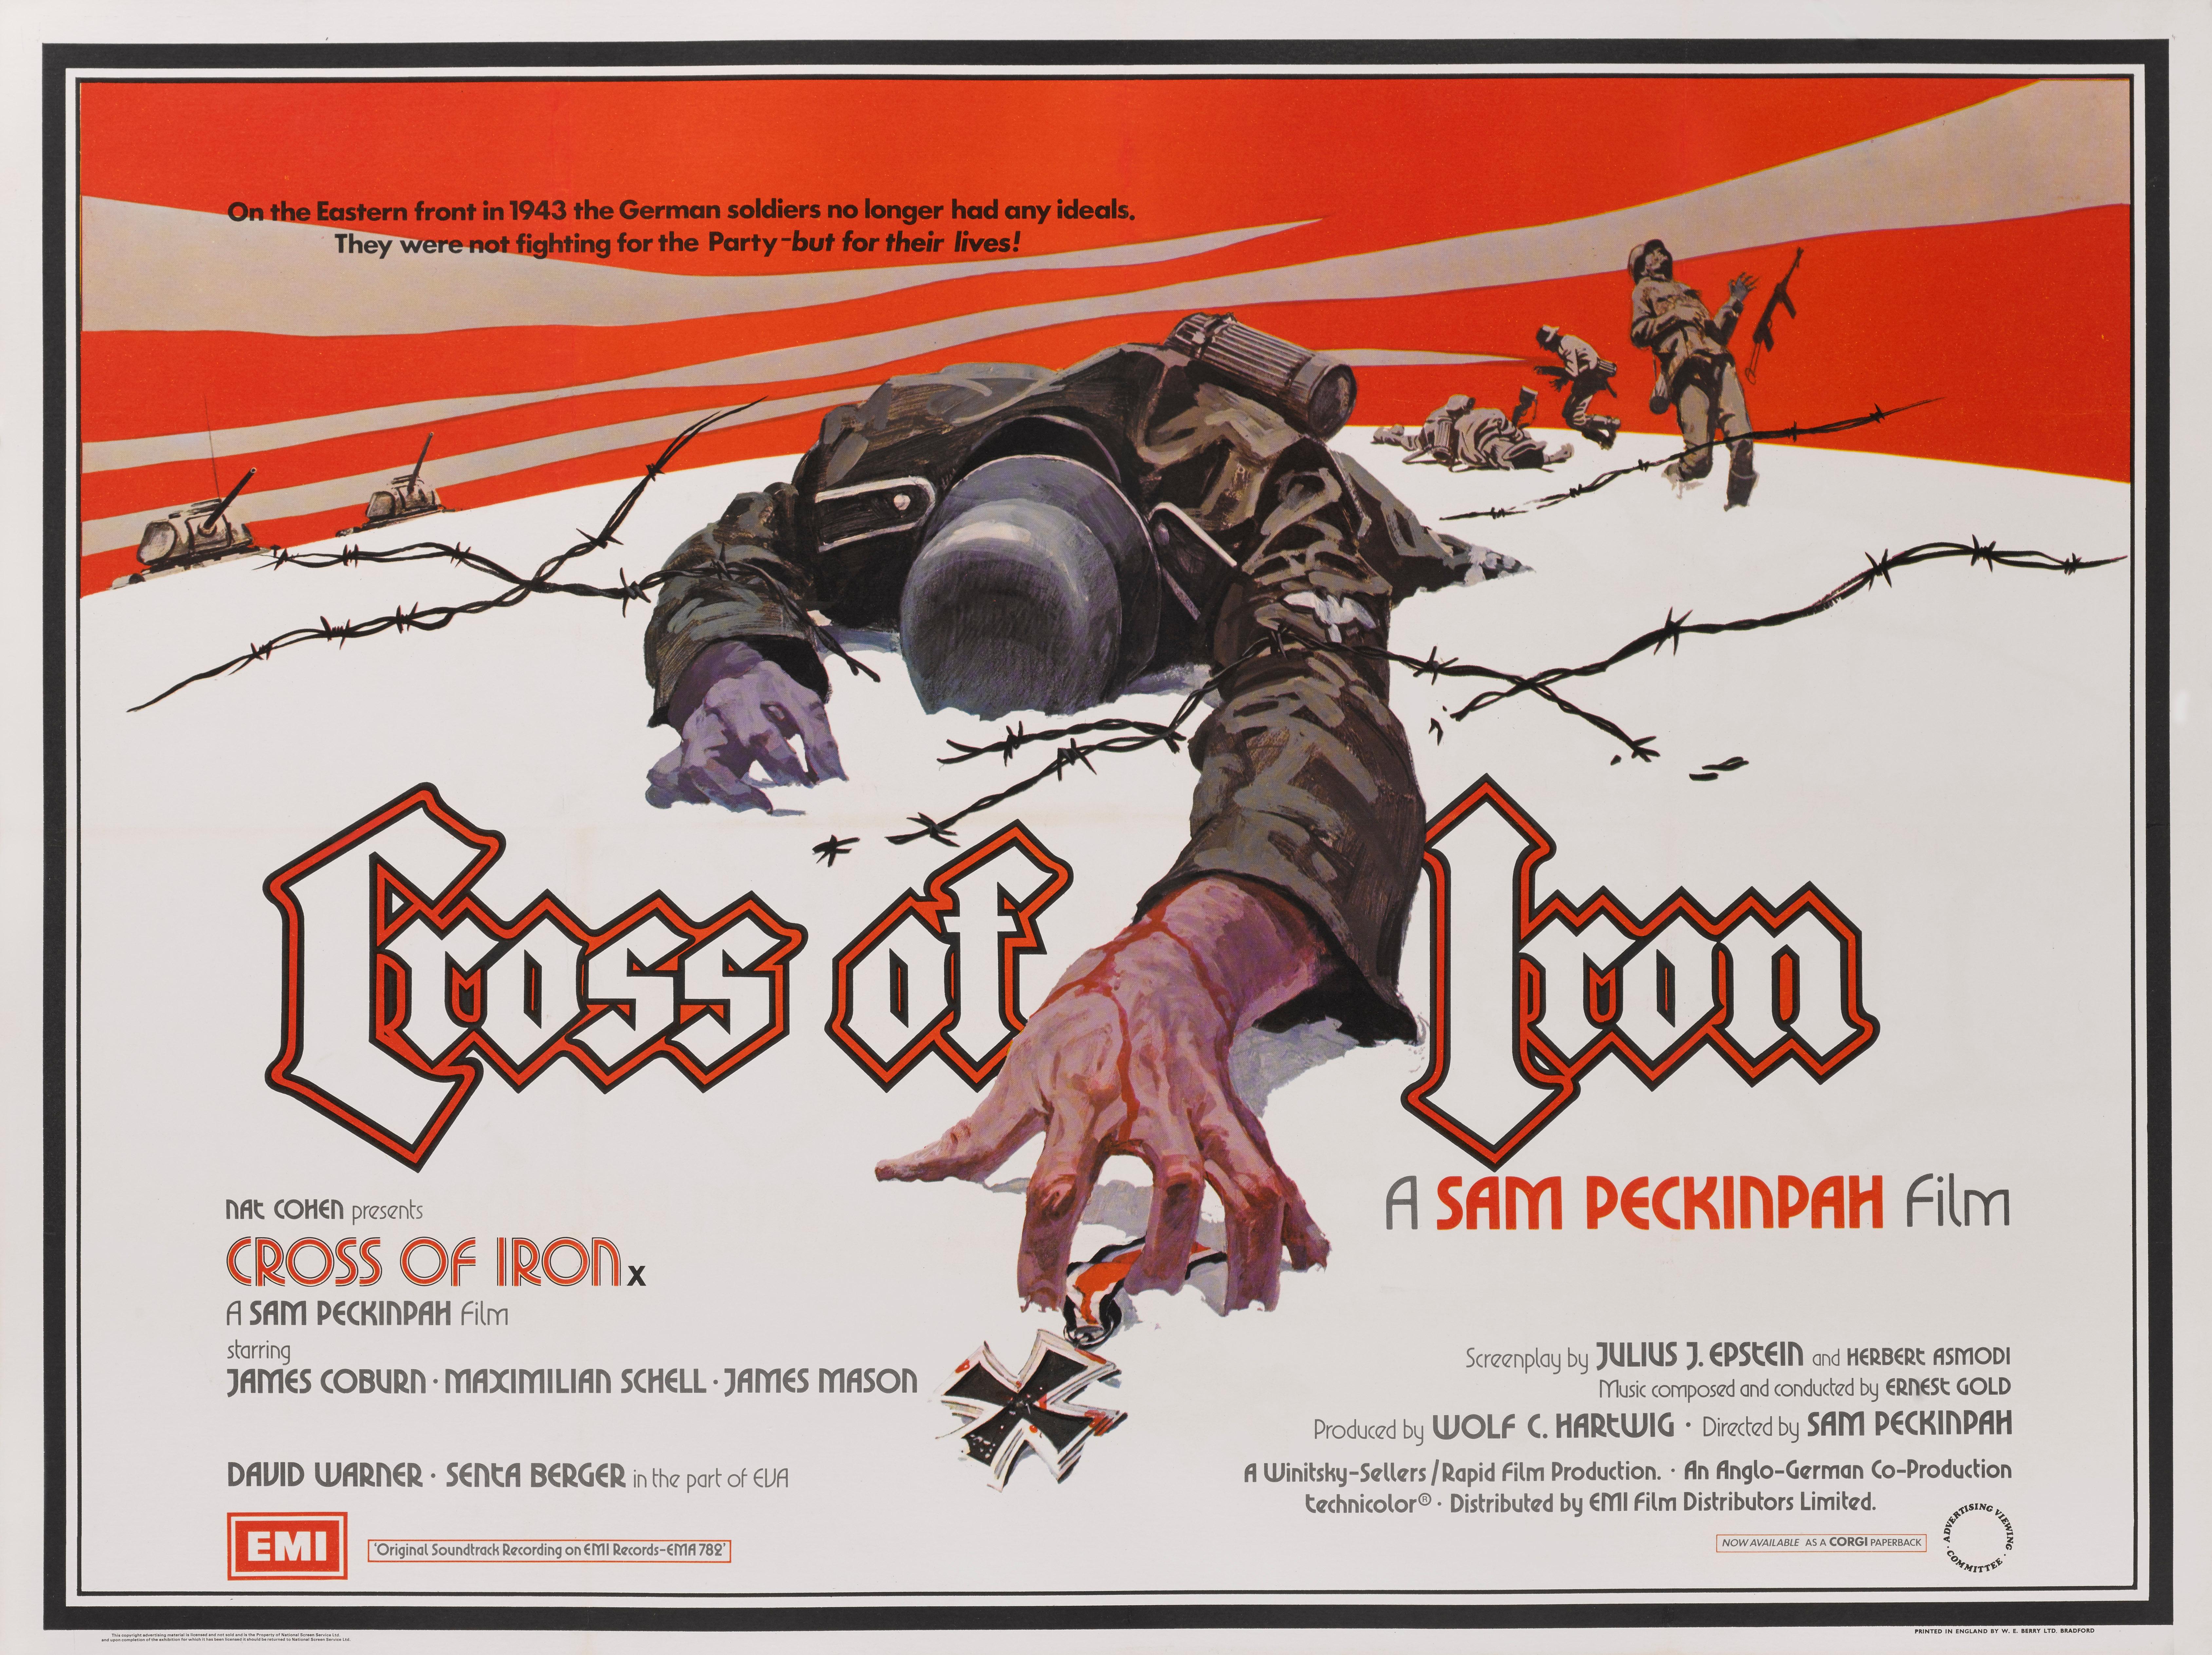 Original British film poster for the the World War II film Cross of Iron 1977.
The film was directed Sam Peckinpah and starred James Coburn, Maximilian Schell, James Mason, David Warner. This poster is conservation line backed and would be shipped